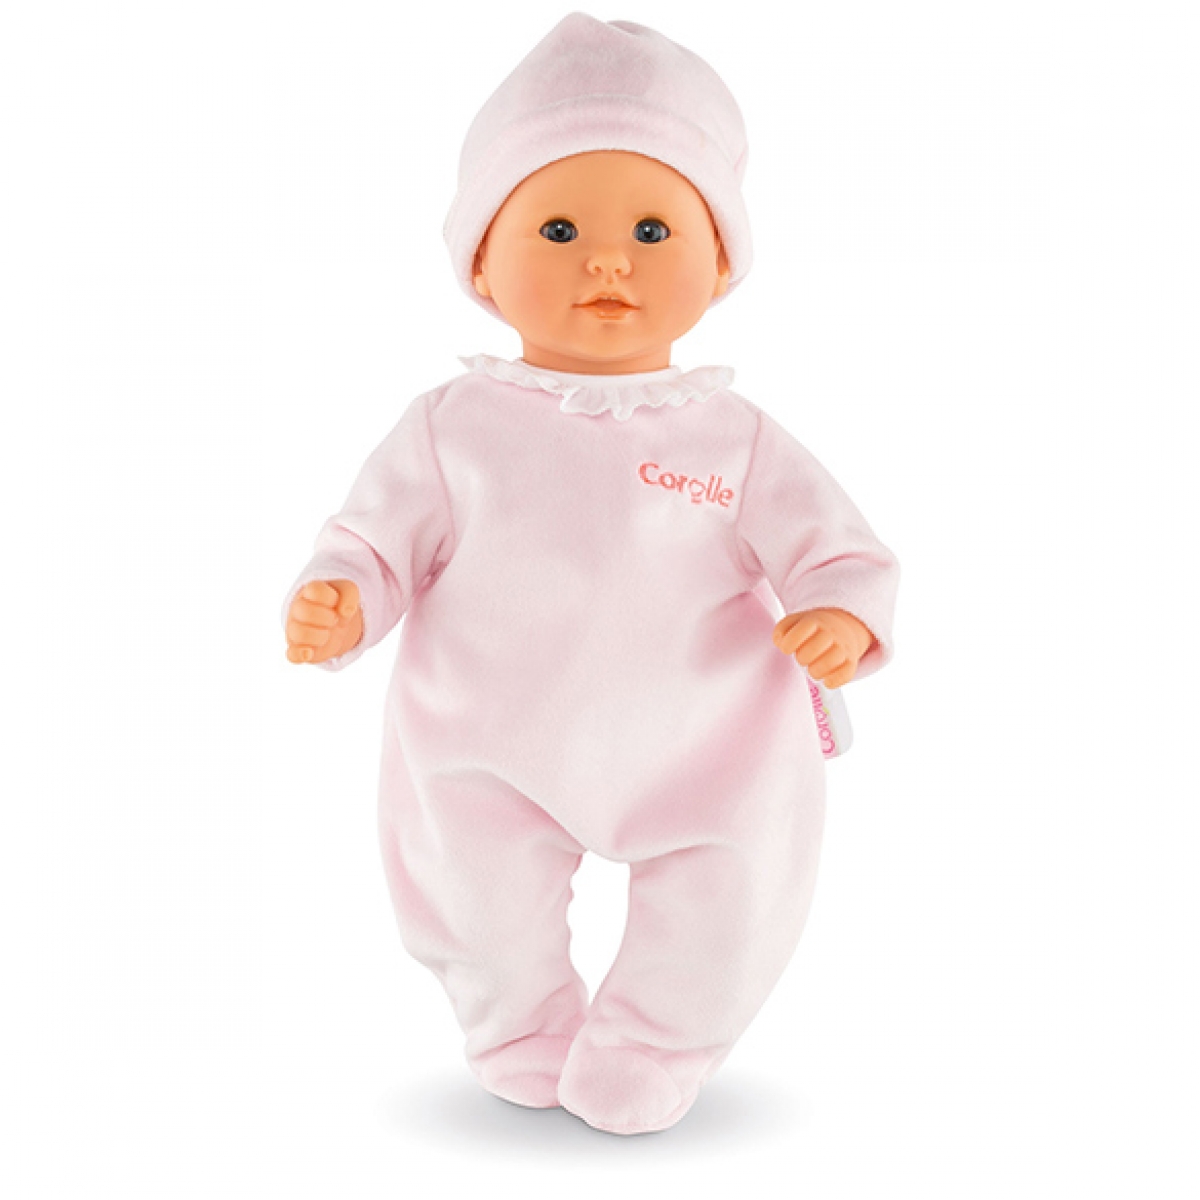 Women's Pajama Baby Doll ARUELLE - Pink Nude - Astrid_pa